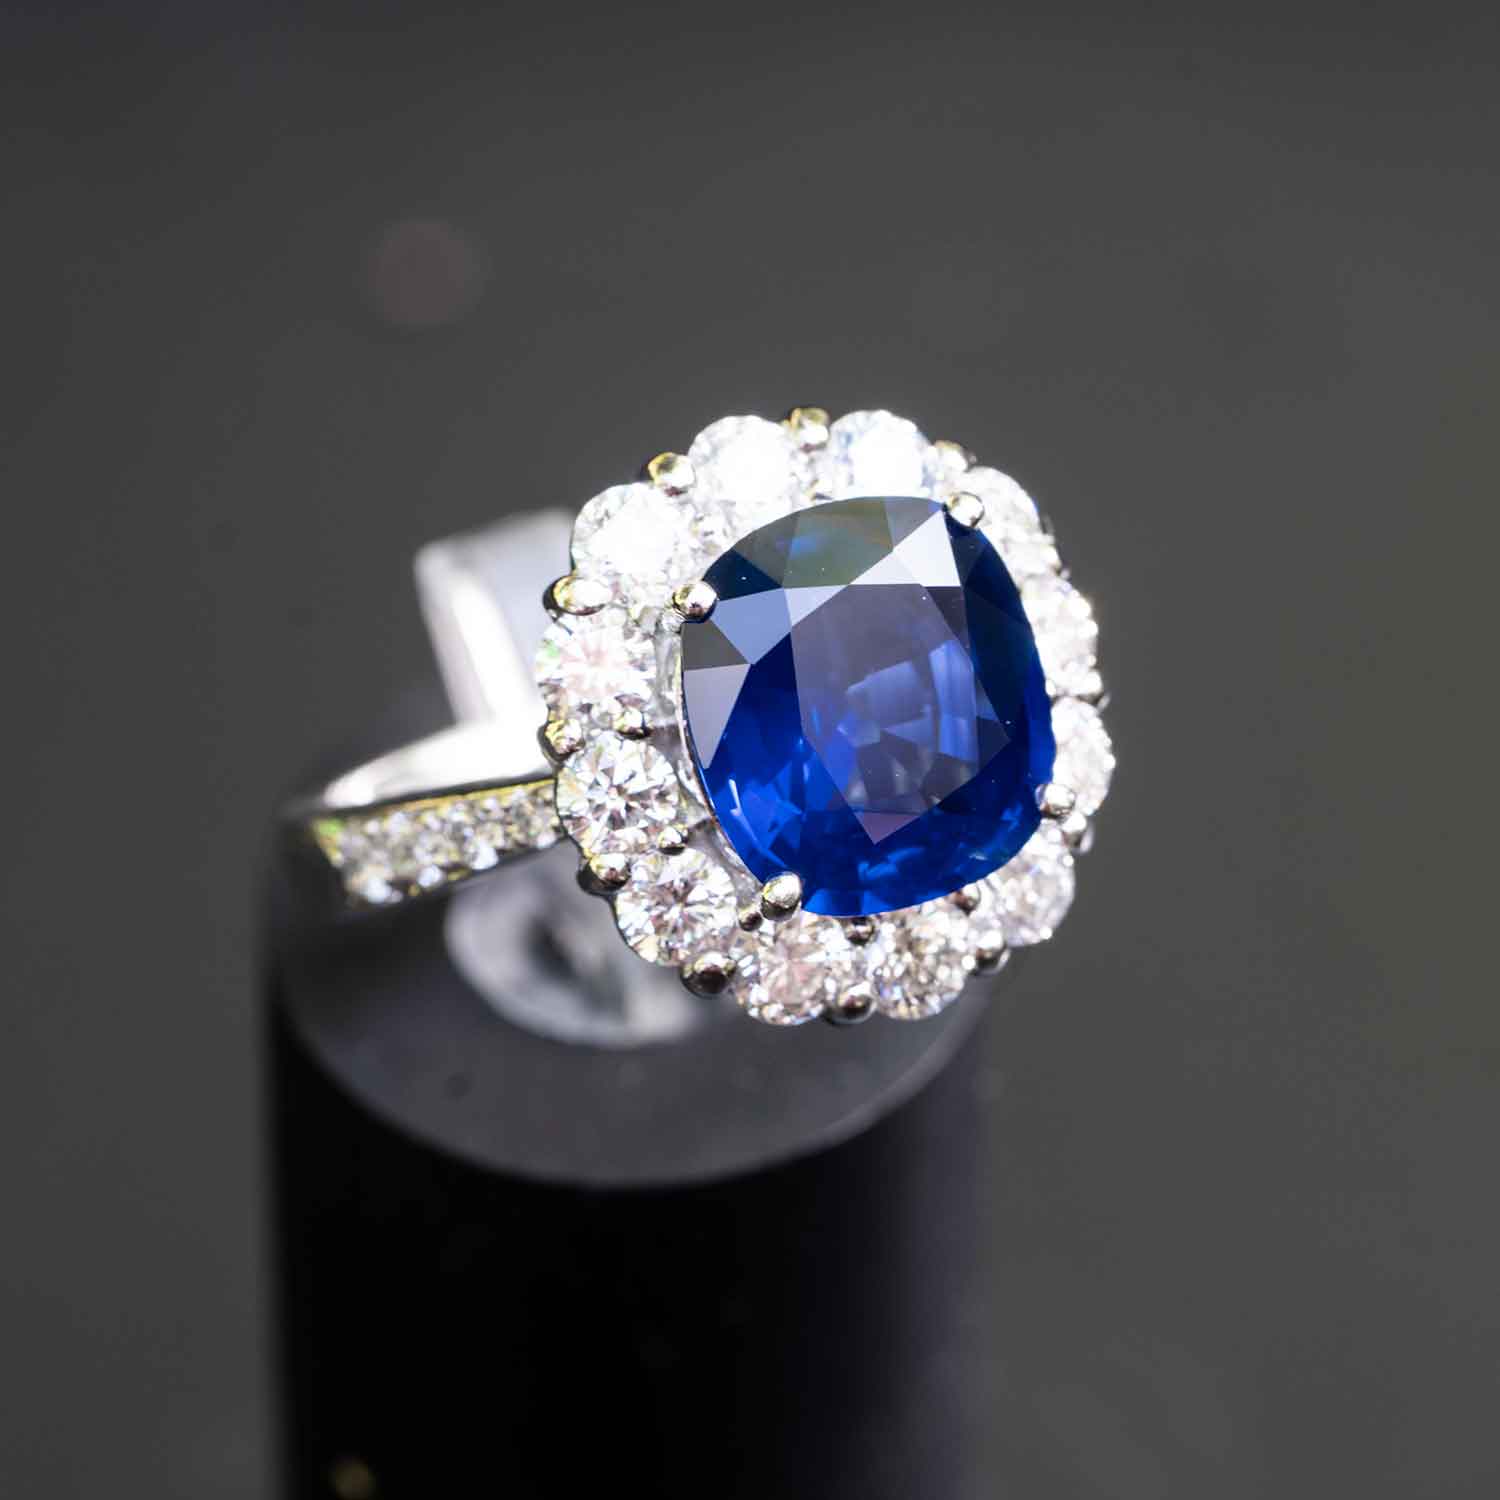 Buy blue sapphire loose stones at economical prices